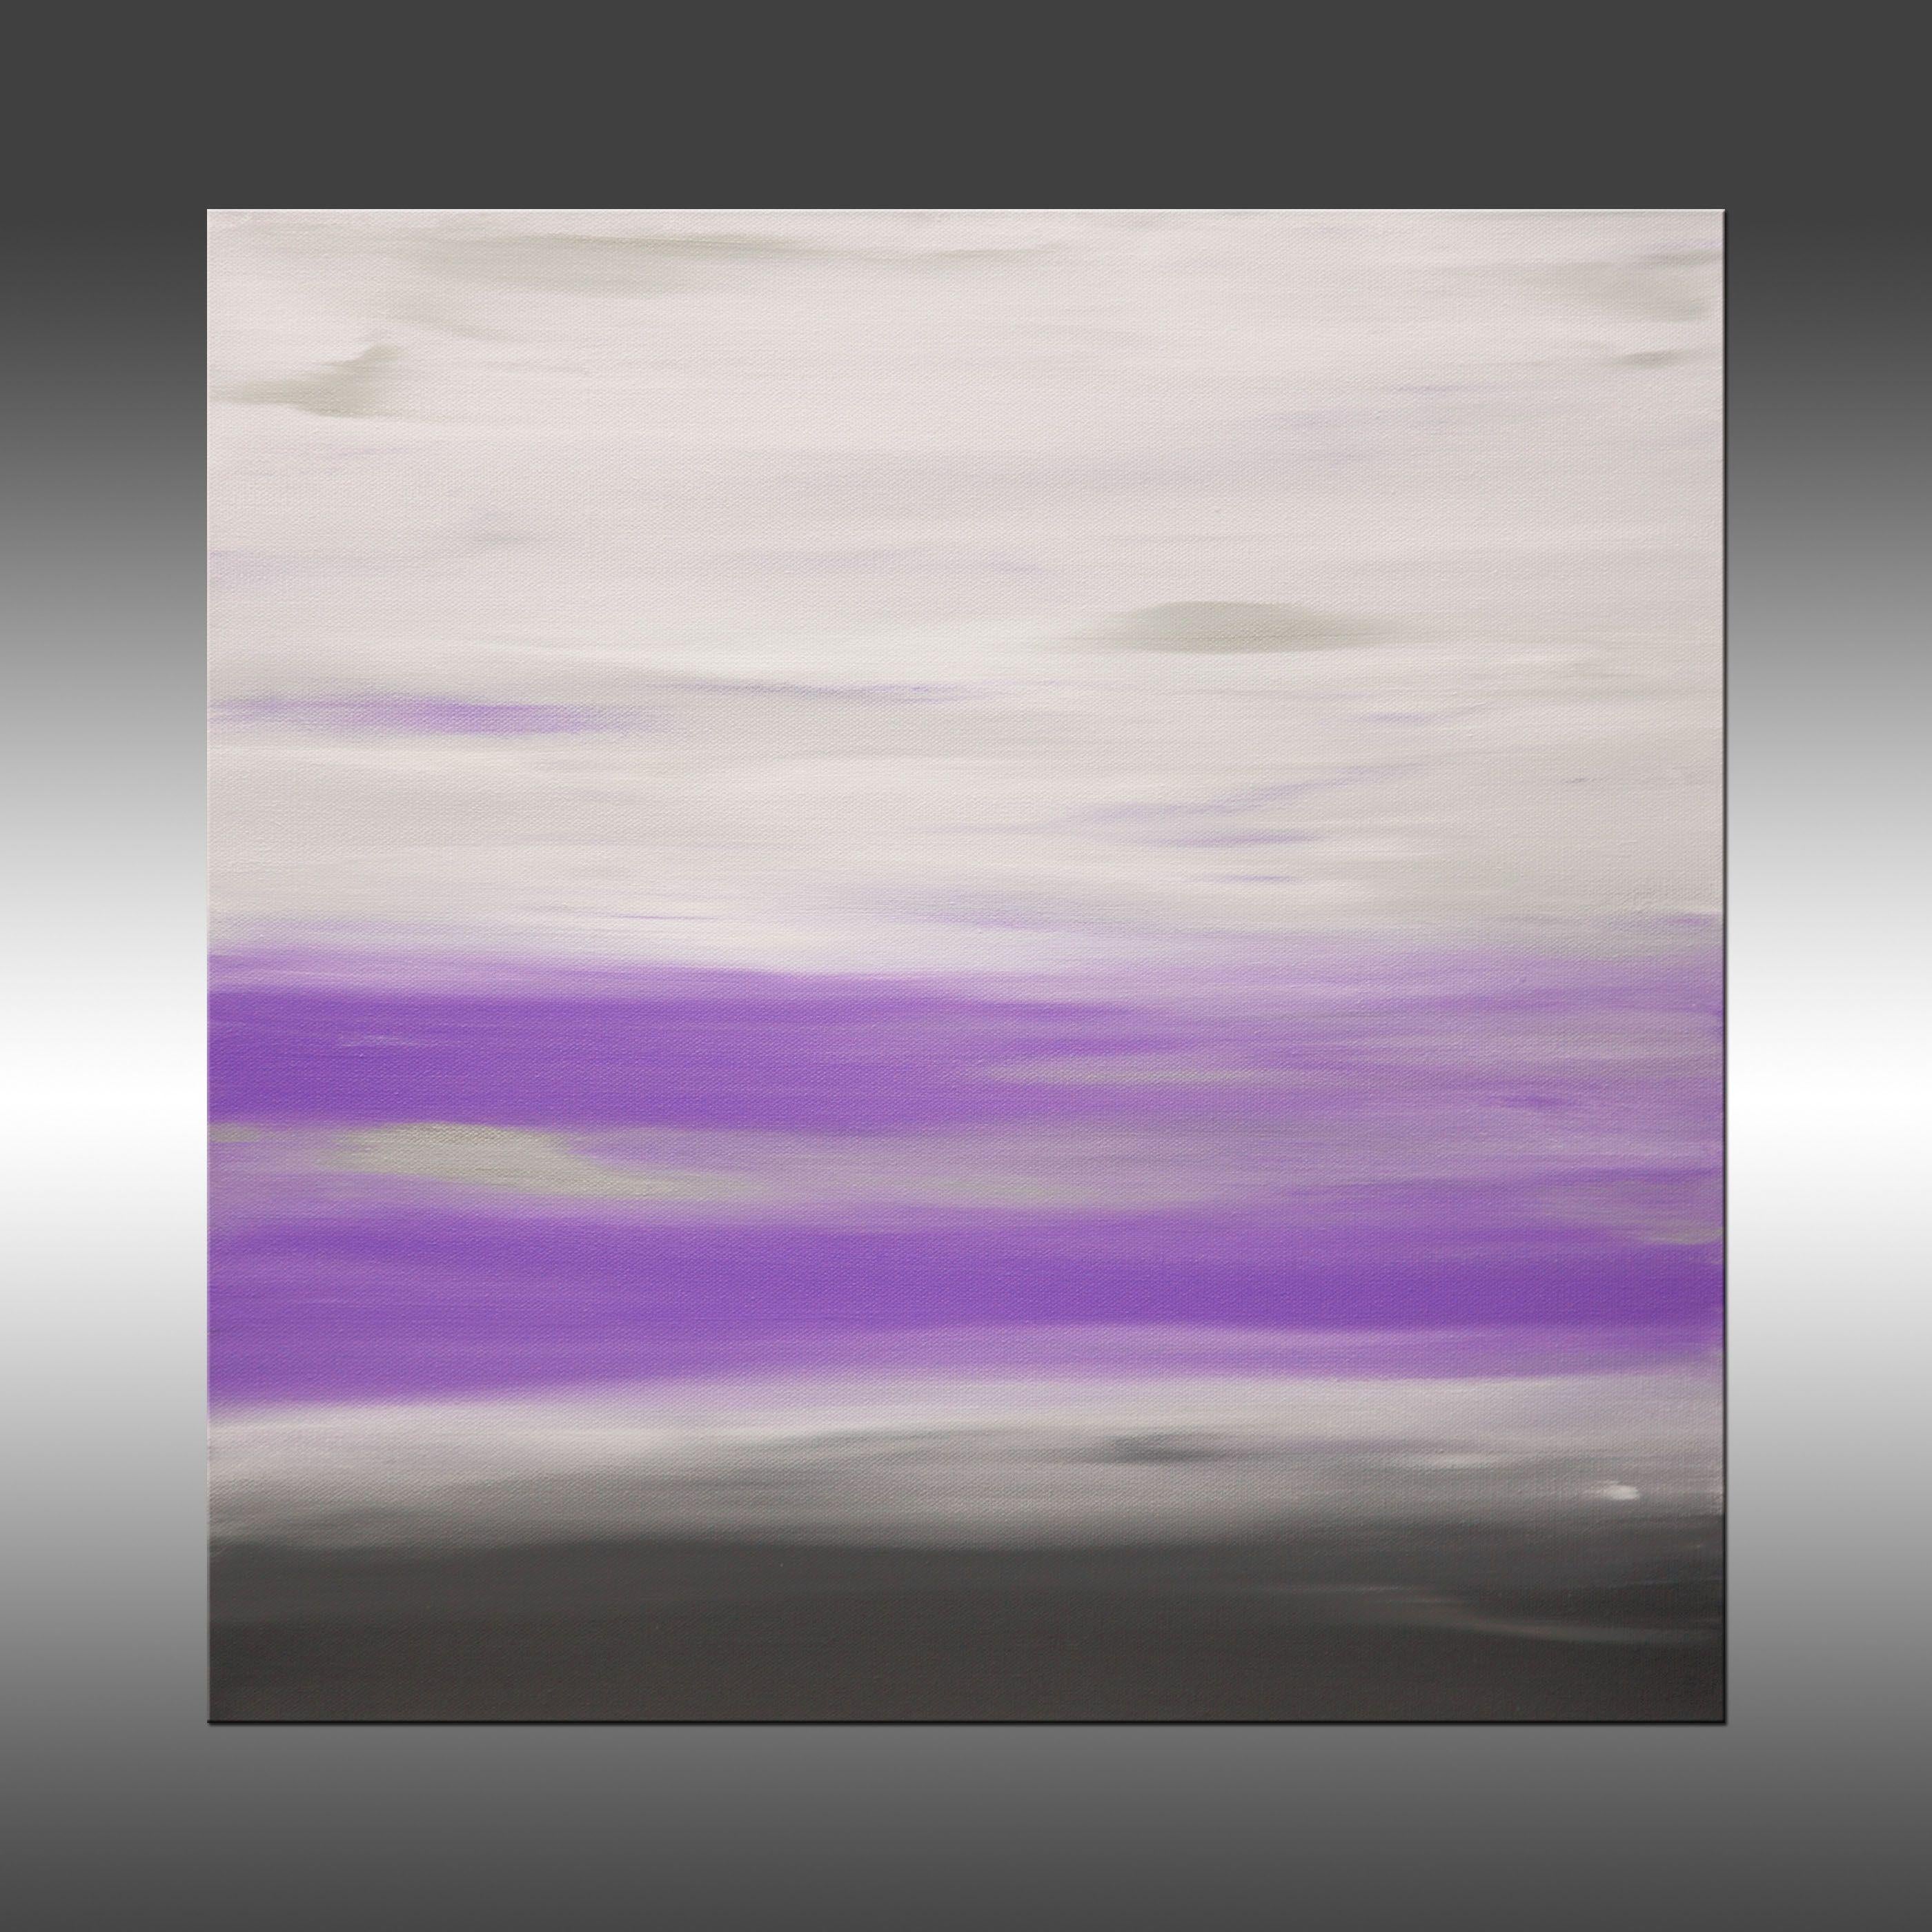 Sunset 63 is an original painting, created with acrylic paint on gallery-wrapped canvas. It has a width of 20 inches and a height of 20 inches with a depth of 1.5 inches (20x20x1.5).    The colors used in the painting are white, purple, silver, and